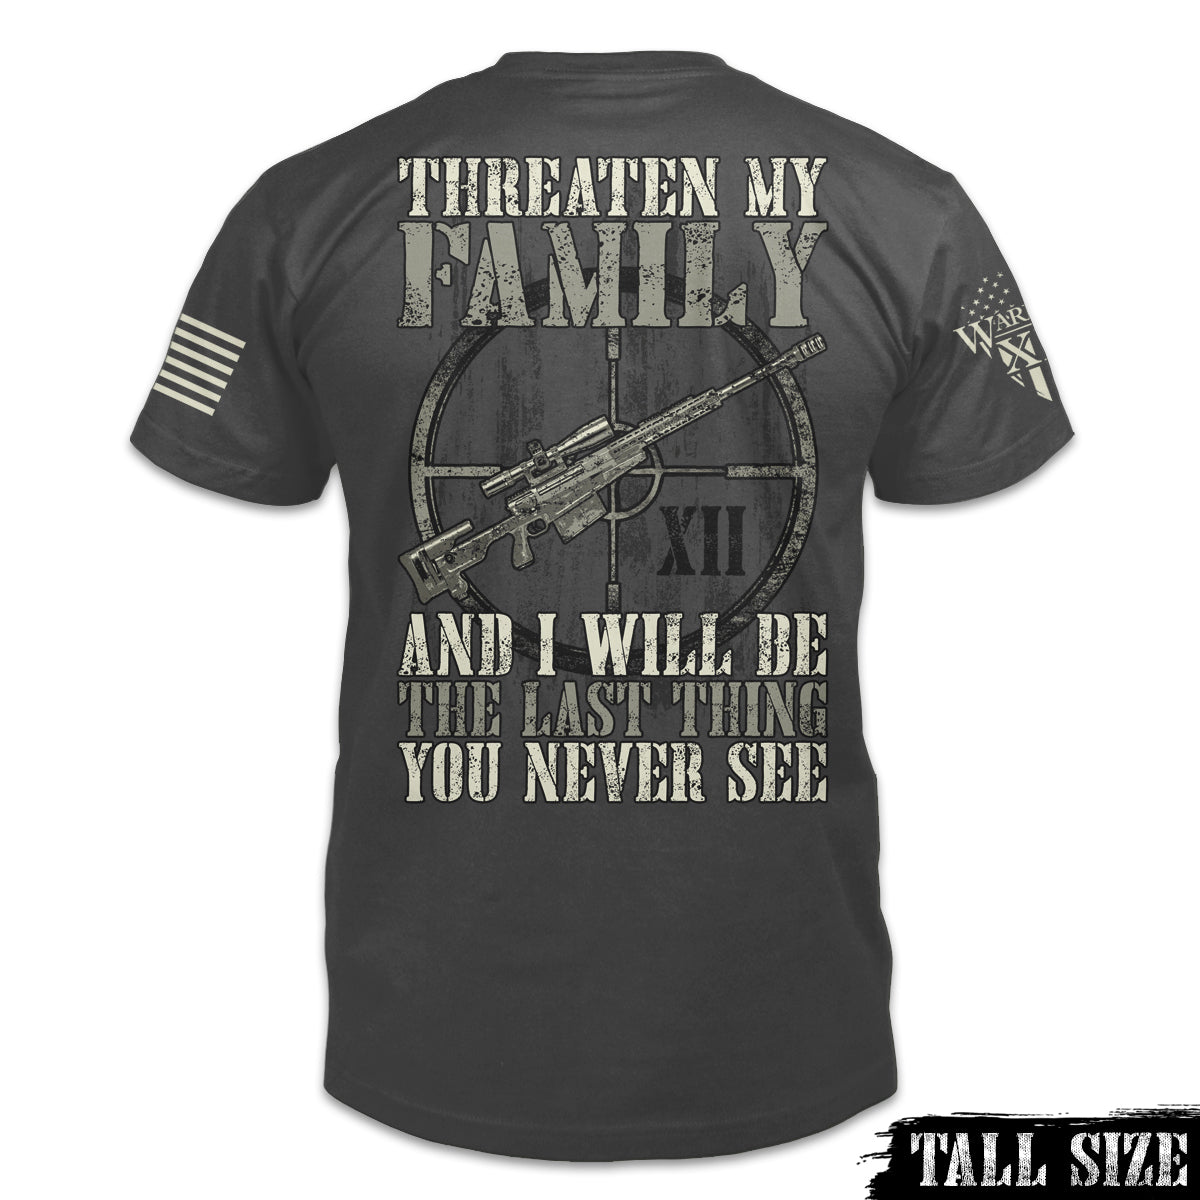 A grey tall size shirt with the words "Threaten My Family and I'll Be The Last Thing You Never See" and a gun printed on the back of the shirt.